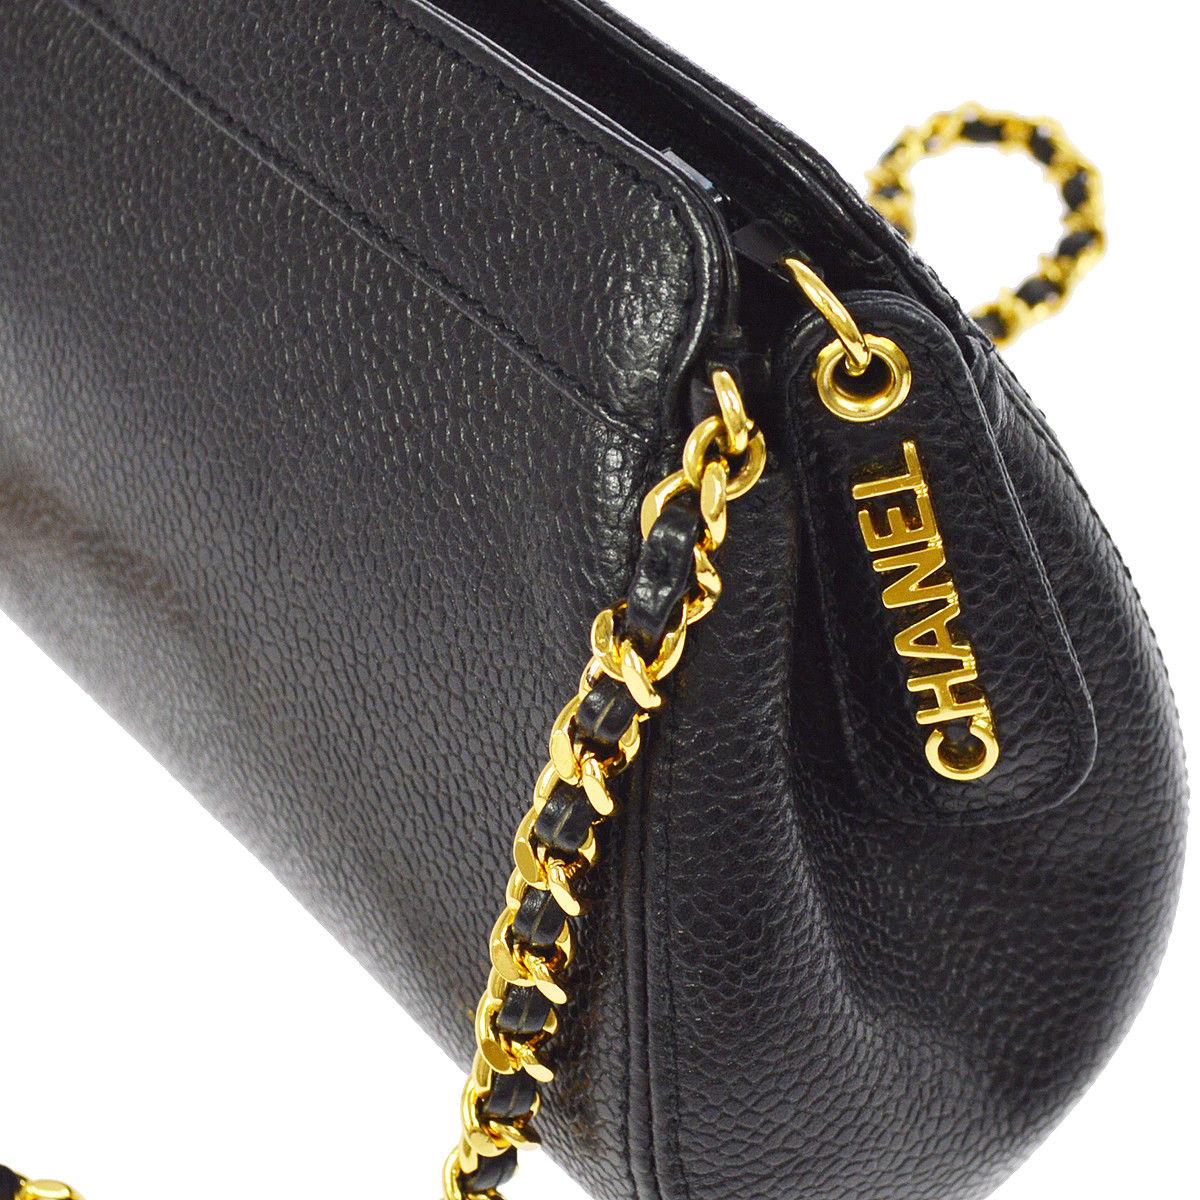 Chanel Black Caviar Leather Gold Mini 2 in 1 Clutch Party Shoulder Bag

Caviar
Gold tone hardware
Leather lining
Zipper closure
Made in Italy
Date code present
Shoulder strap drop 23